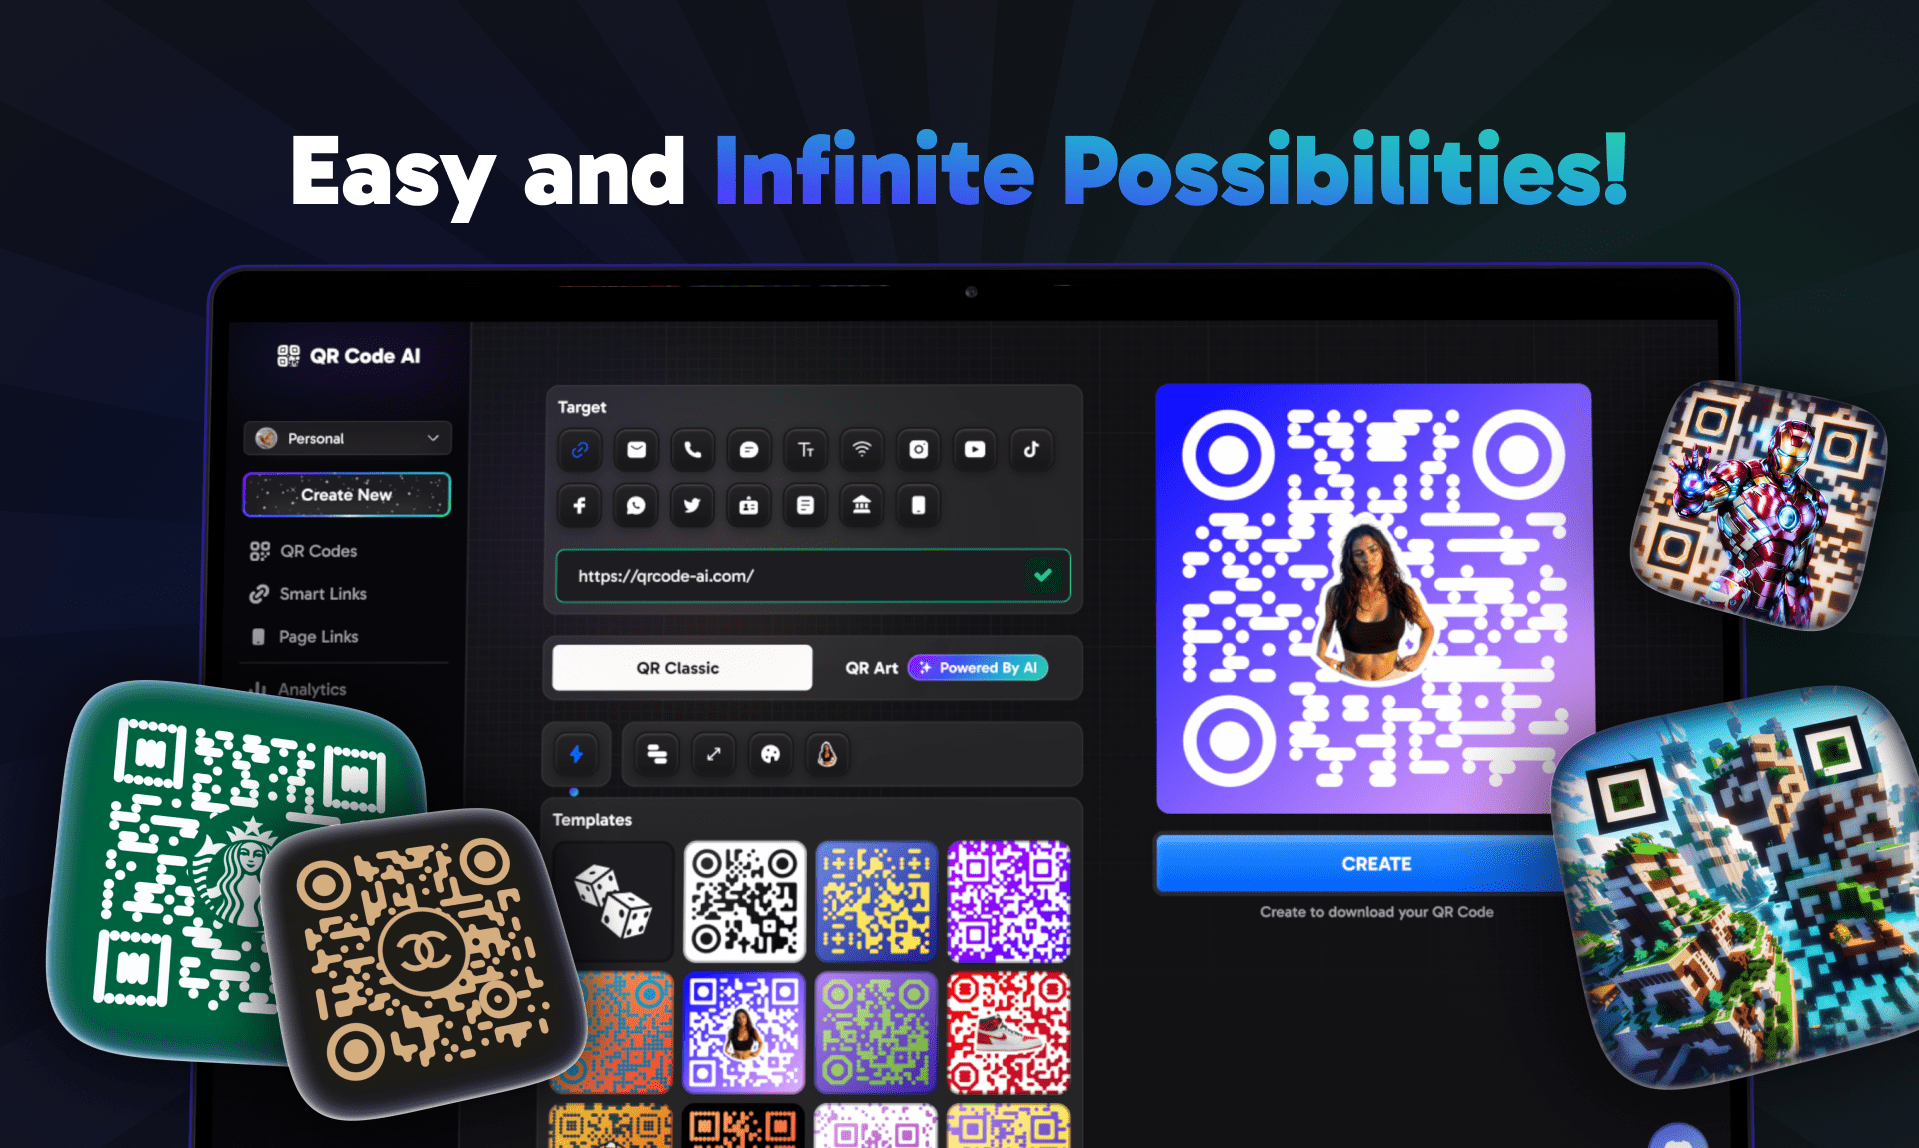 qrcode-ai.com Easy and Infinite Possibilities!